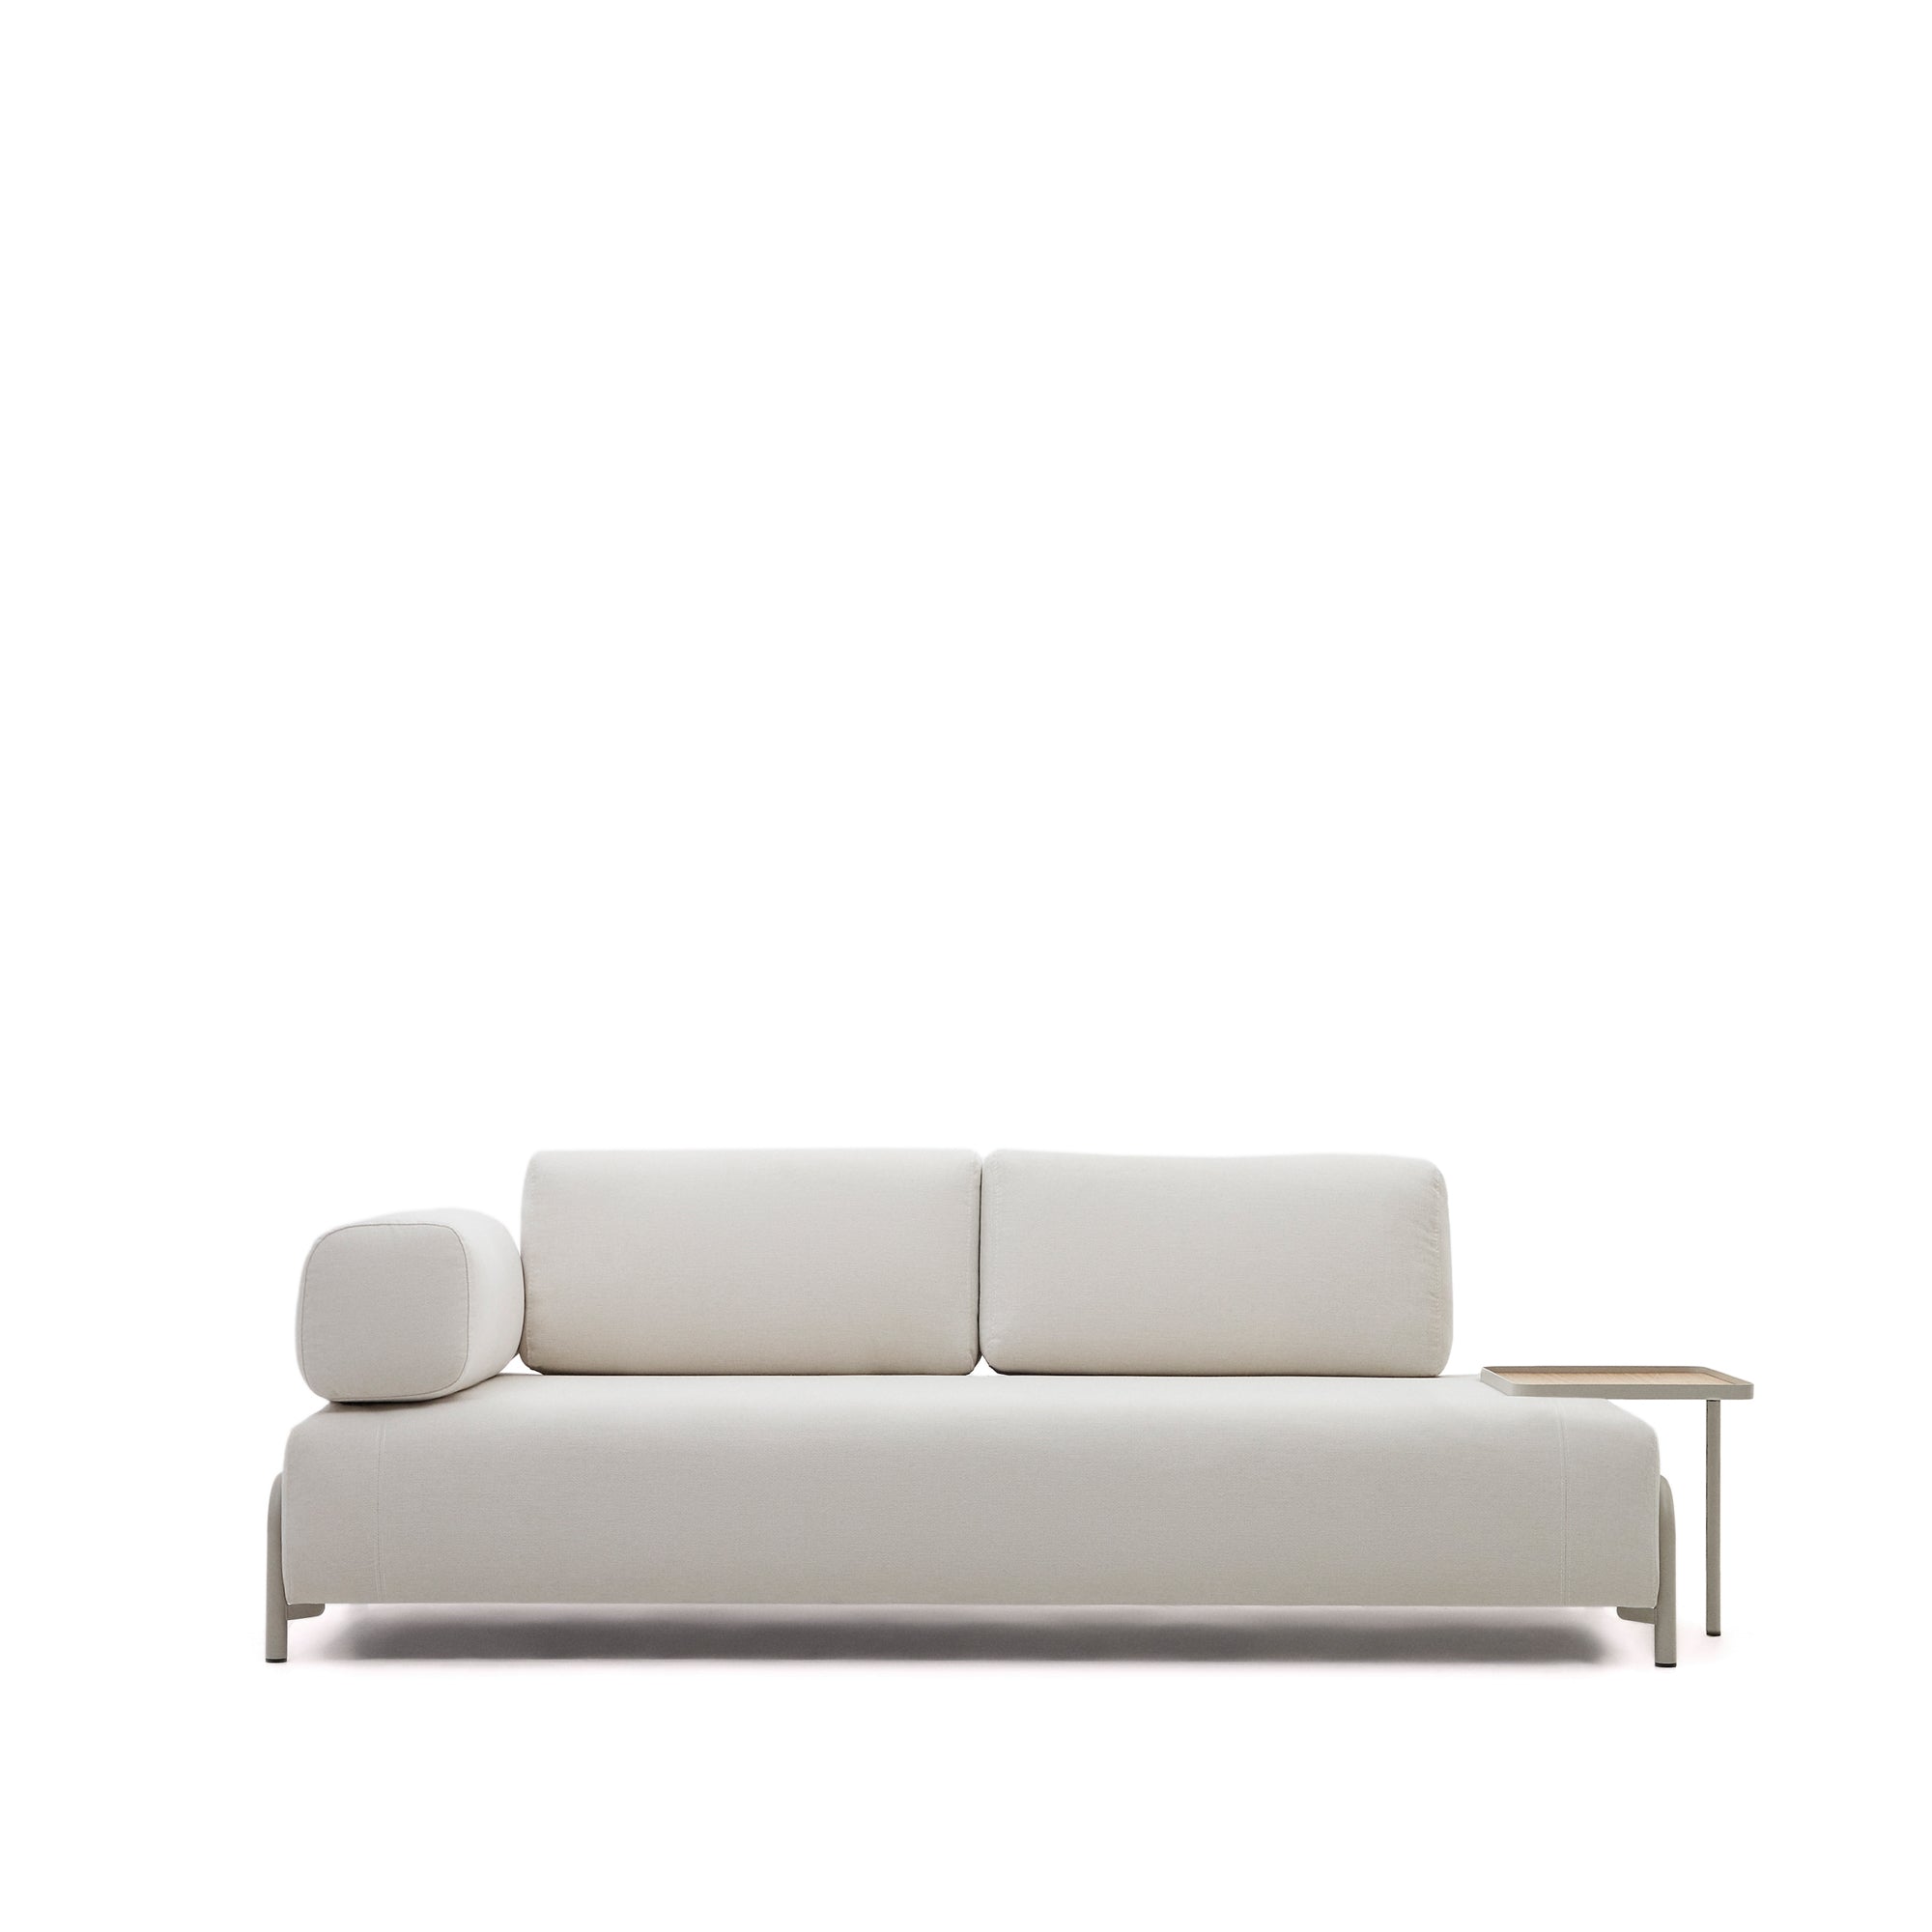 Compo 3-seater sofa chenille beige, large tray oak veneer and grey metal structure 232cm